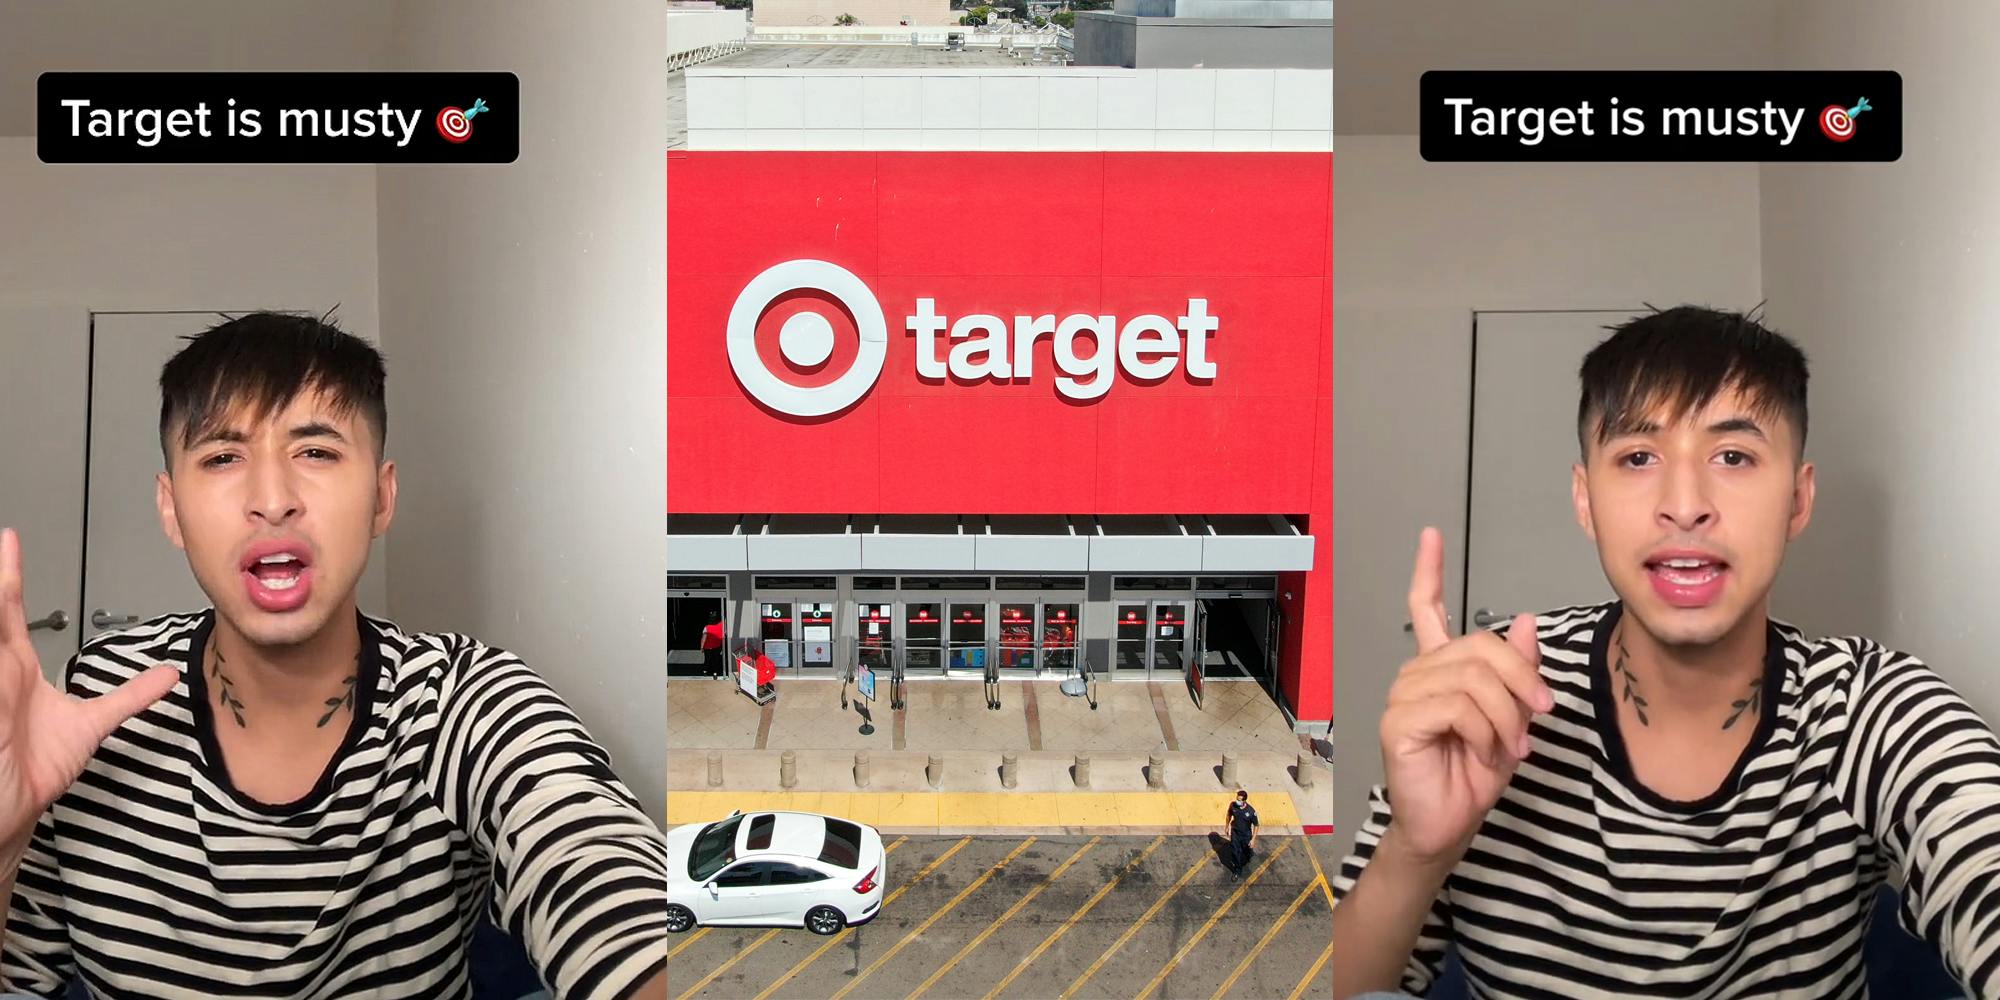 Man speaking in front of white walls with hand up caption "Target is musty" (l) Target store with sign and parking lot (c) man speaking in front of white walls with finger up caption "Target is musty" (r)